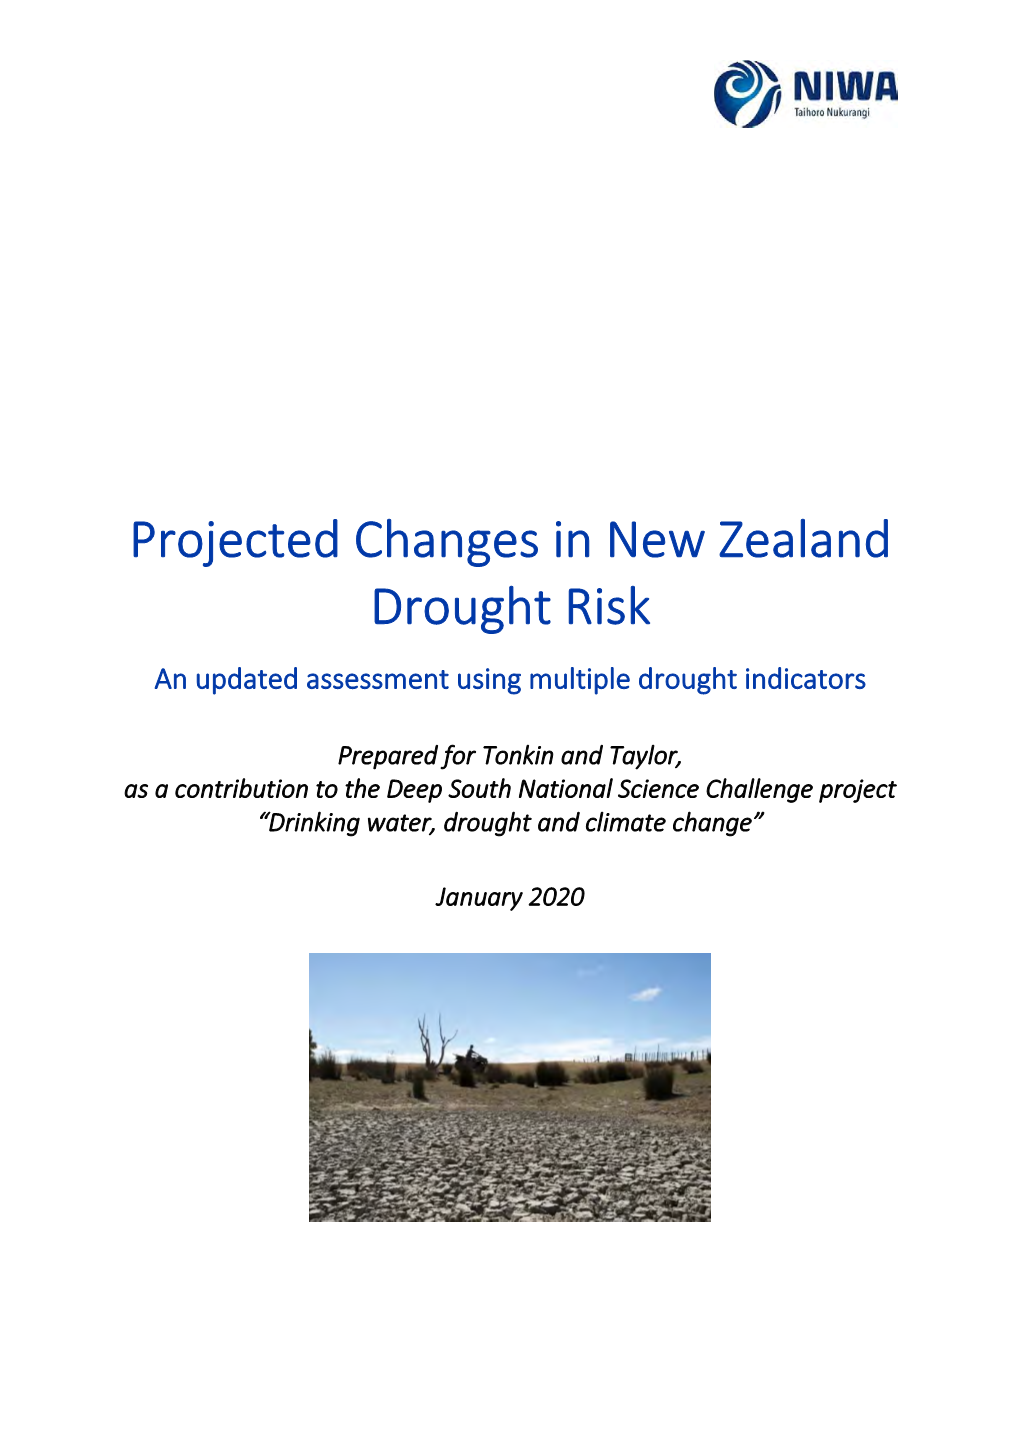 Projected Changes in New Zealand Drought Risk an Updated Assessment Using Multiple Drought Indicators